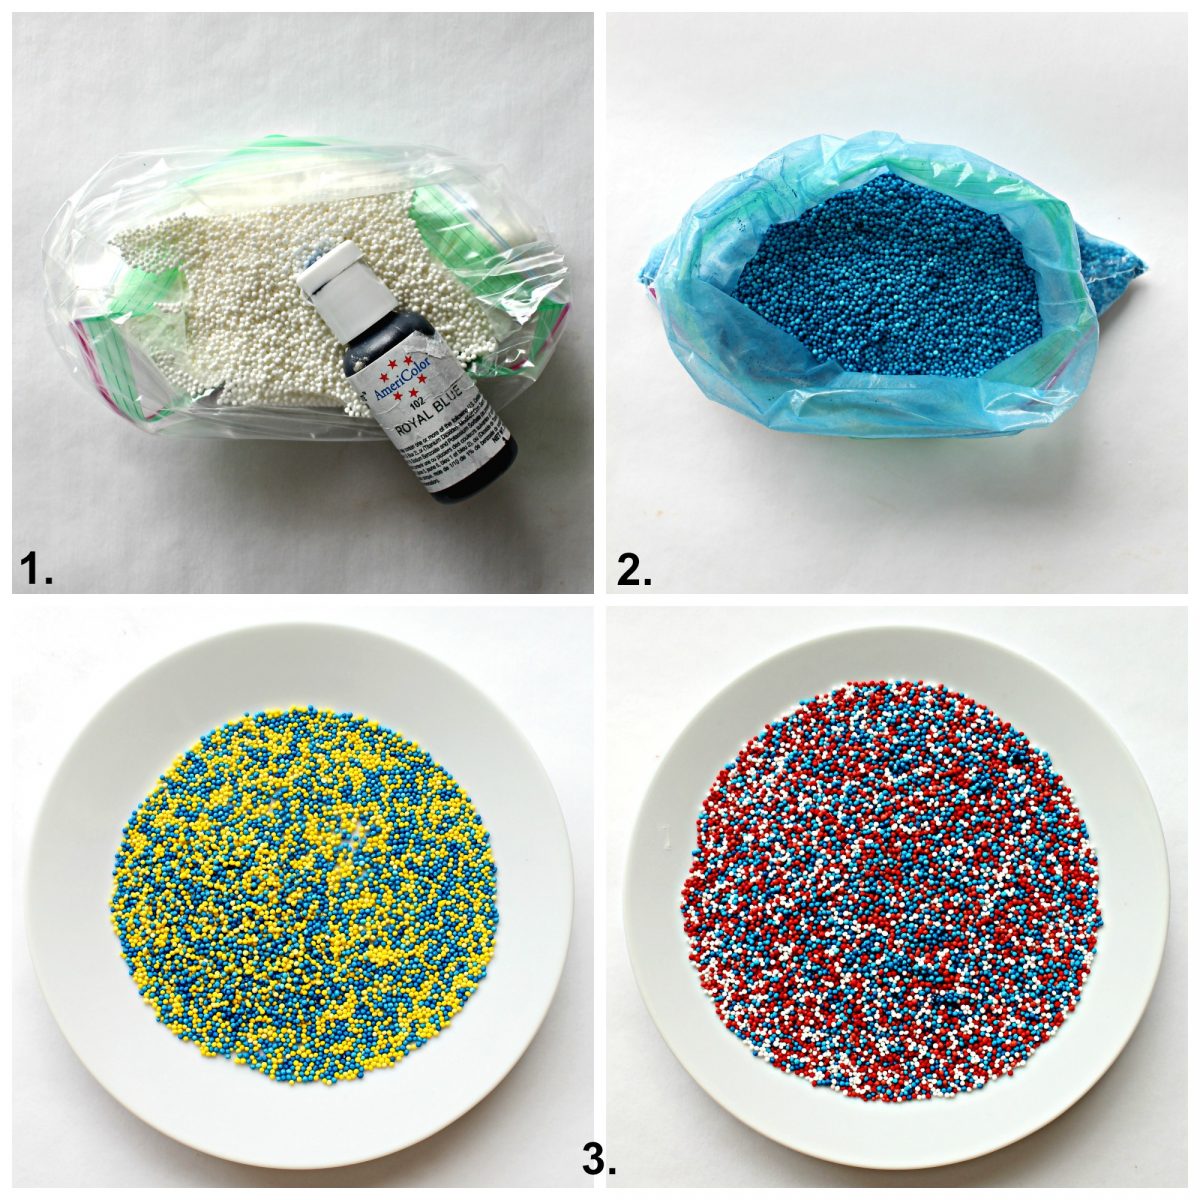 Image collage showing how to turning white nonpareils into custom colored sprinkles.